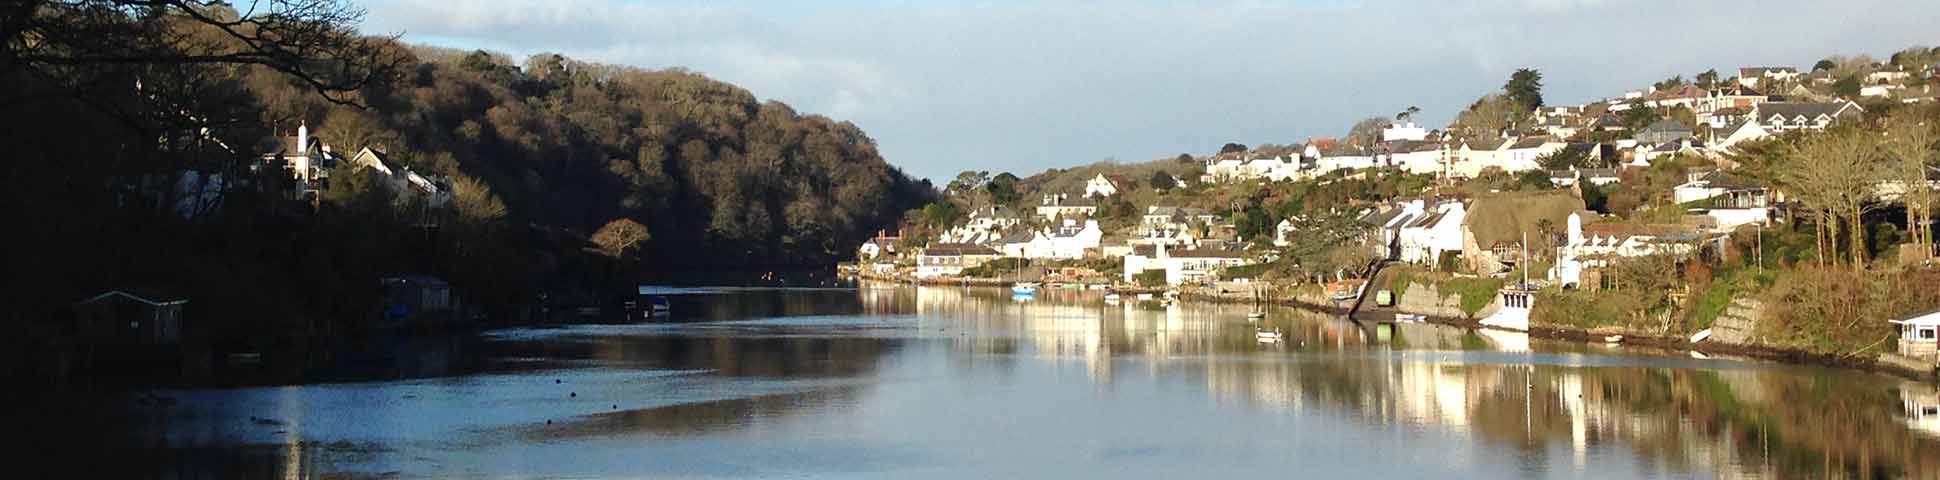 Undiscovered Places to Stay in the UK for 2021: Noss Mayo